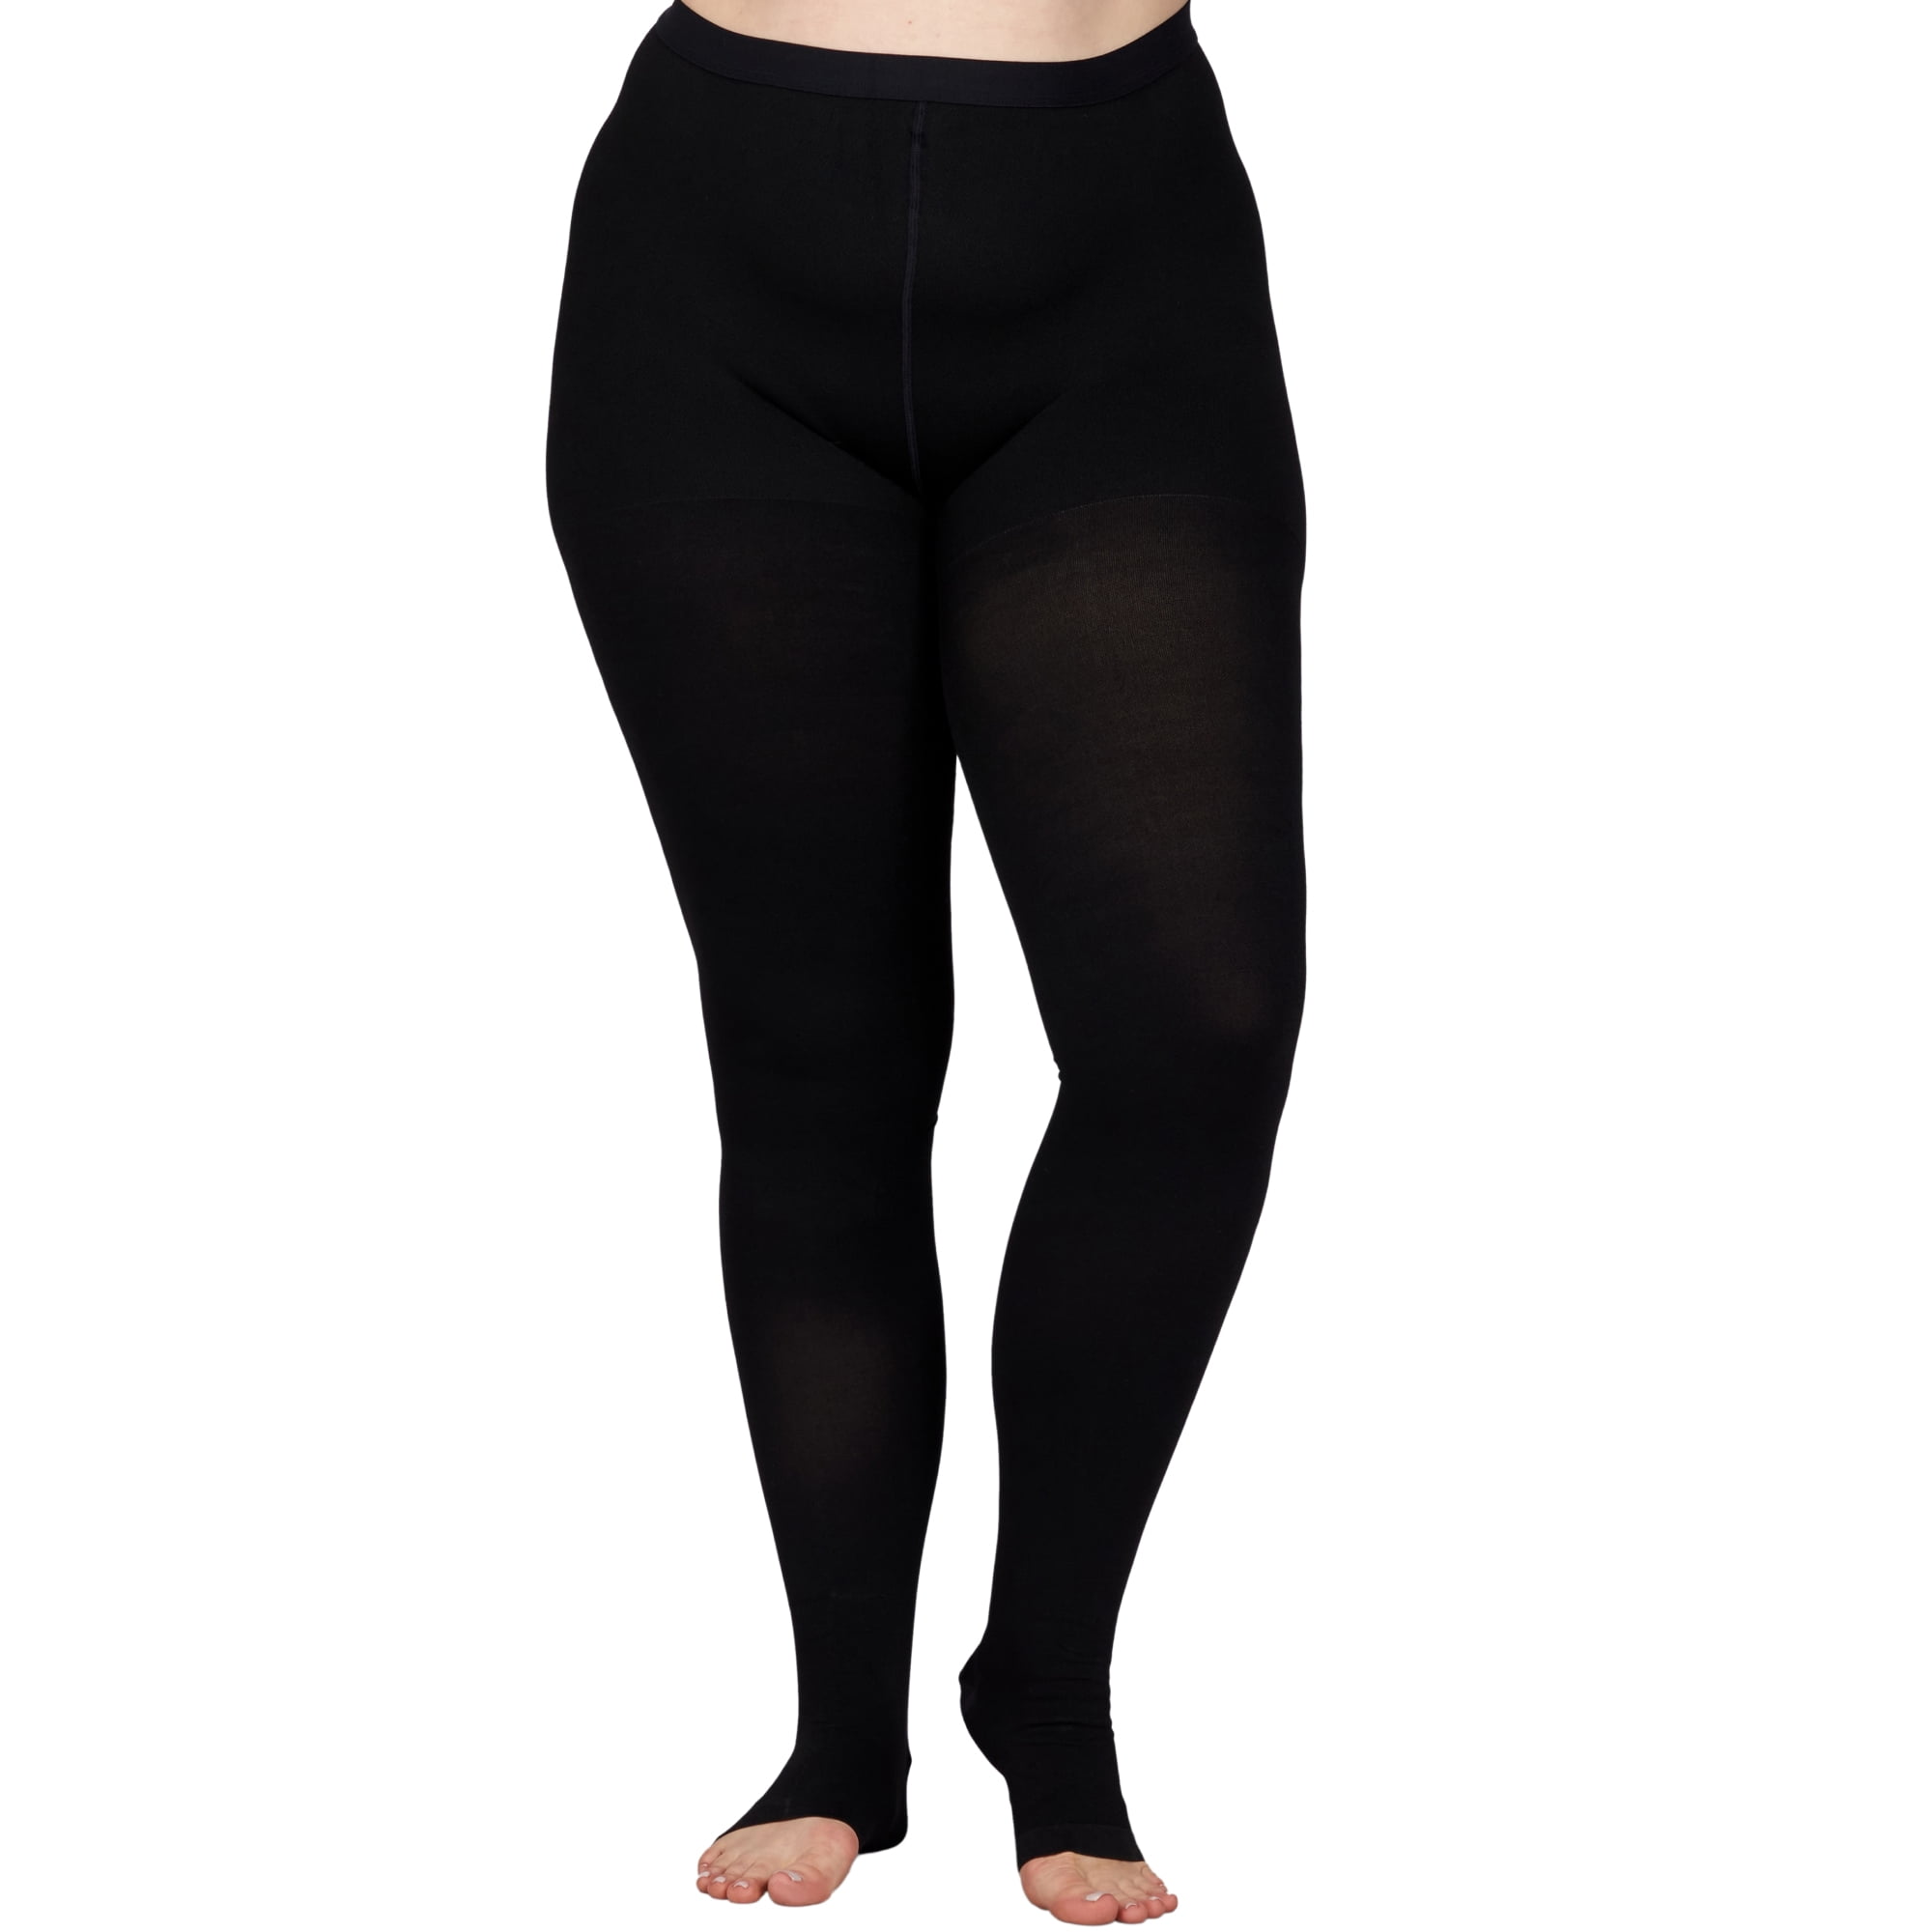 Made in USA - Extra Wide Womens Compression Tights 20-30mmHg - Black, 5XL 